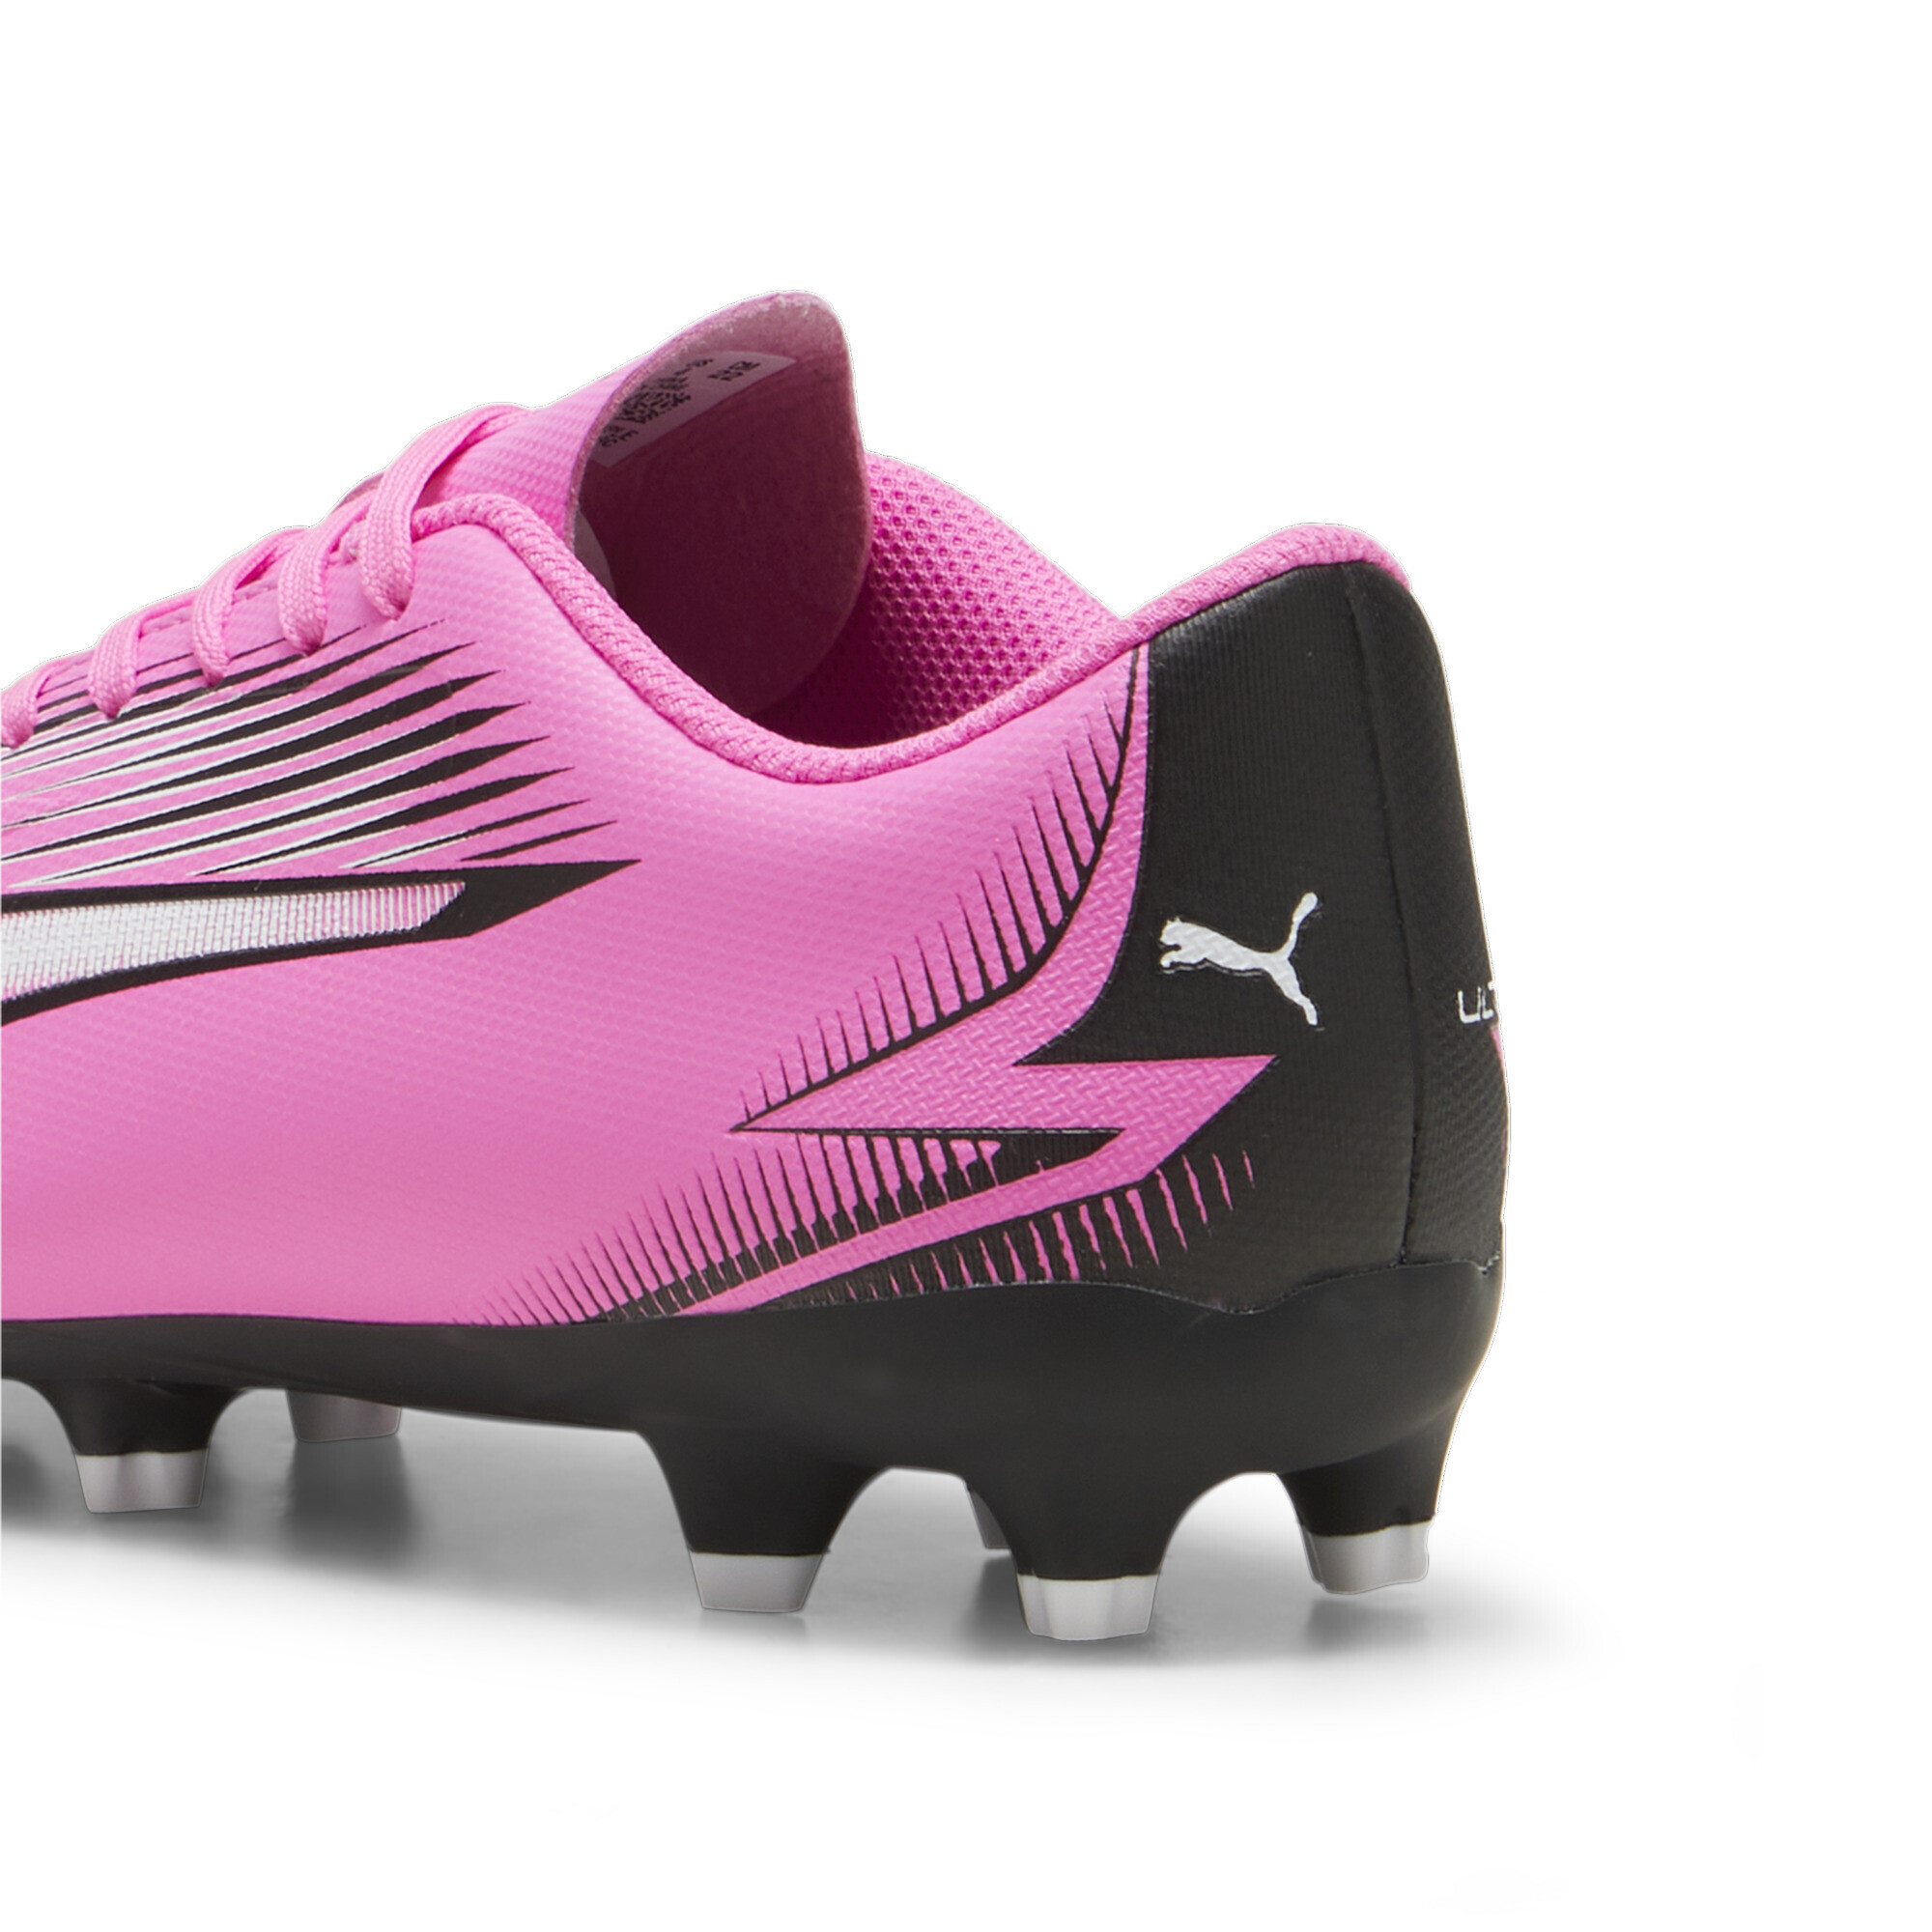 PUMA ULTRA PLAY FG/AG Youth Football Boots In Pink, Size EU 38.5